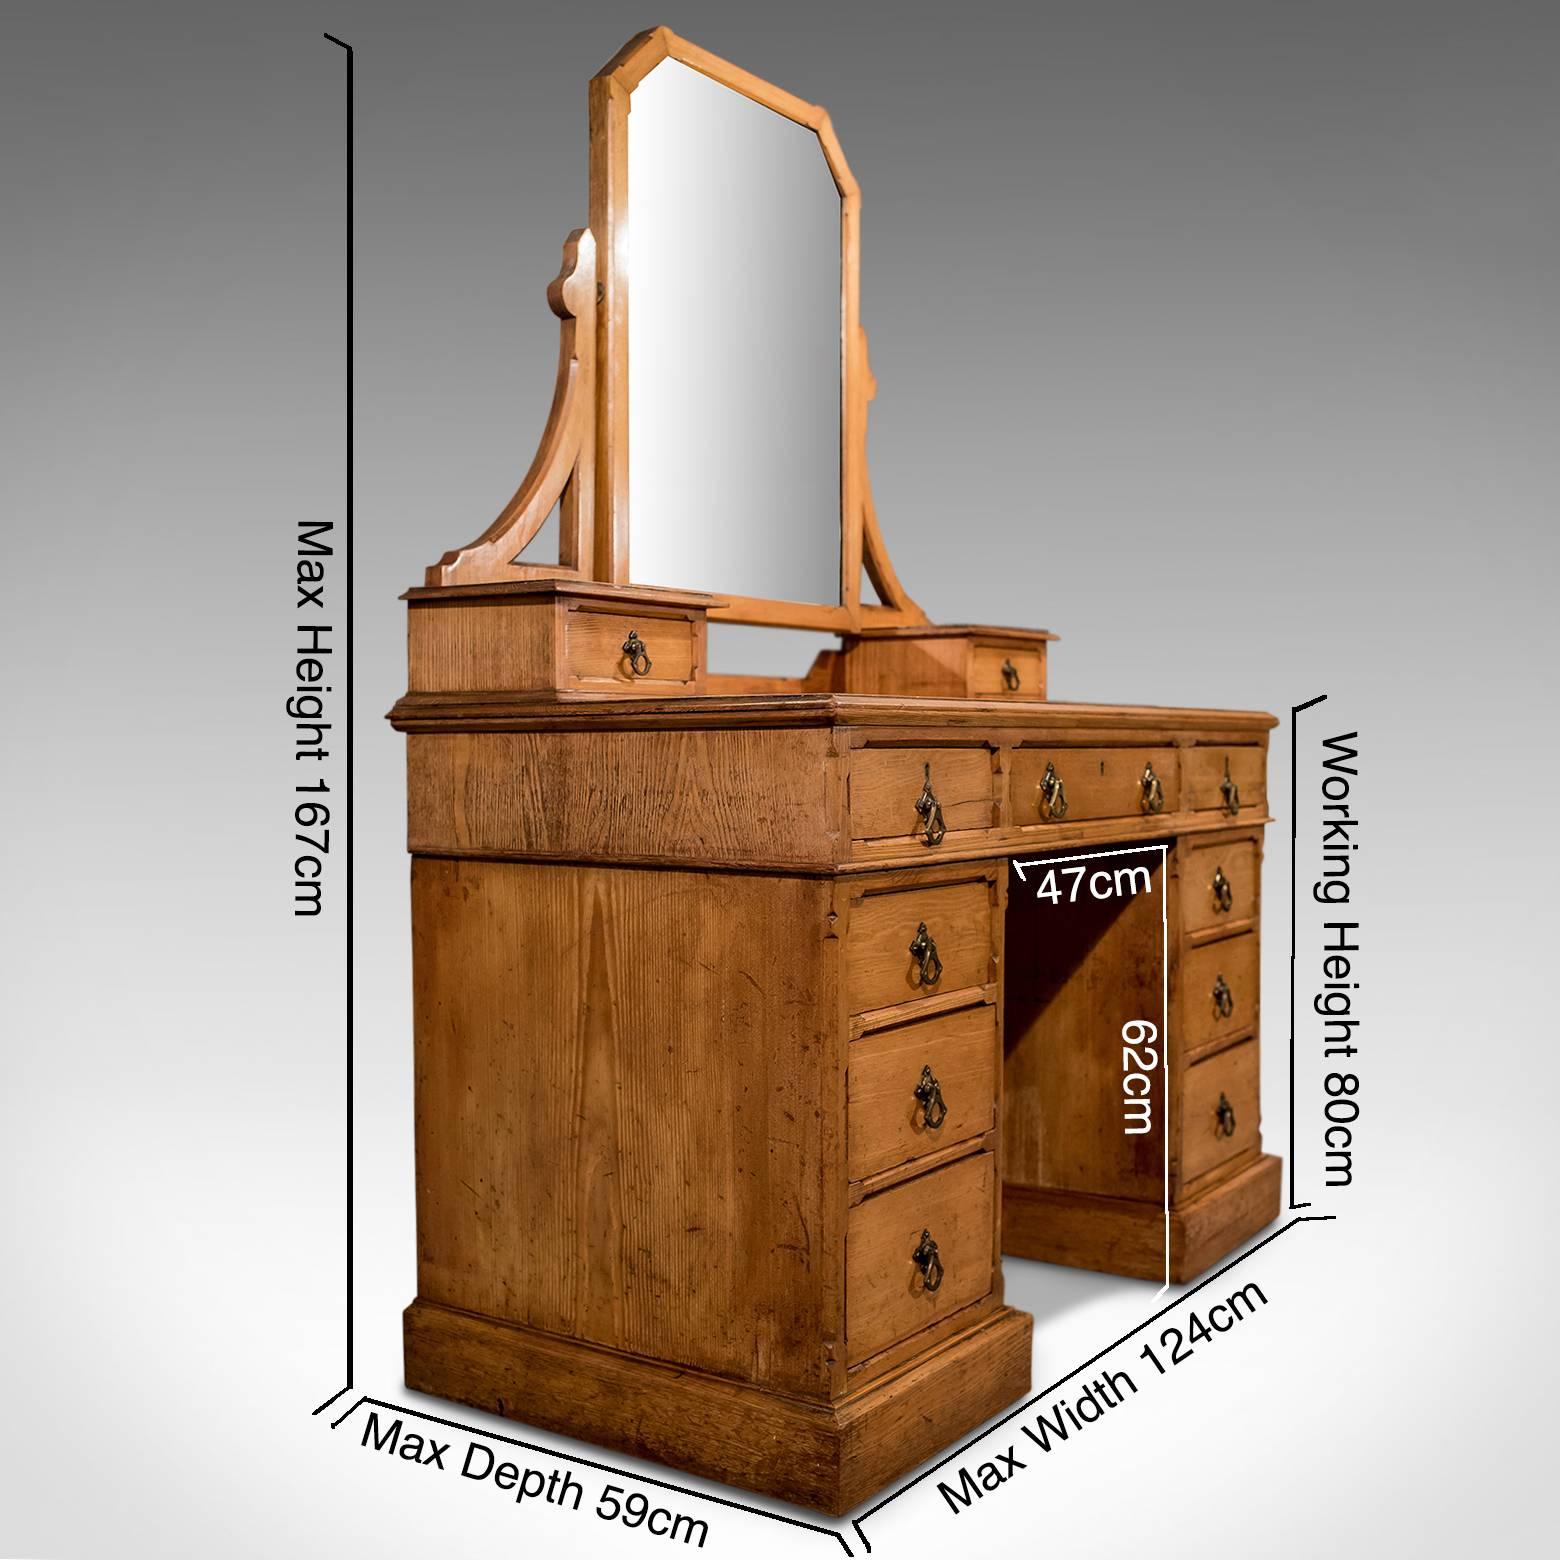 A most pleasing vanity dressing table presented in good antique condition
With Classic Gothic over tones to this well crafted item of functional furniture
Delightfully dressed with original quality cast handles showing ecclesiastical Gothic